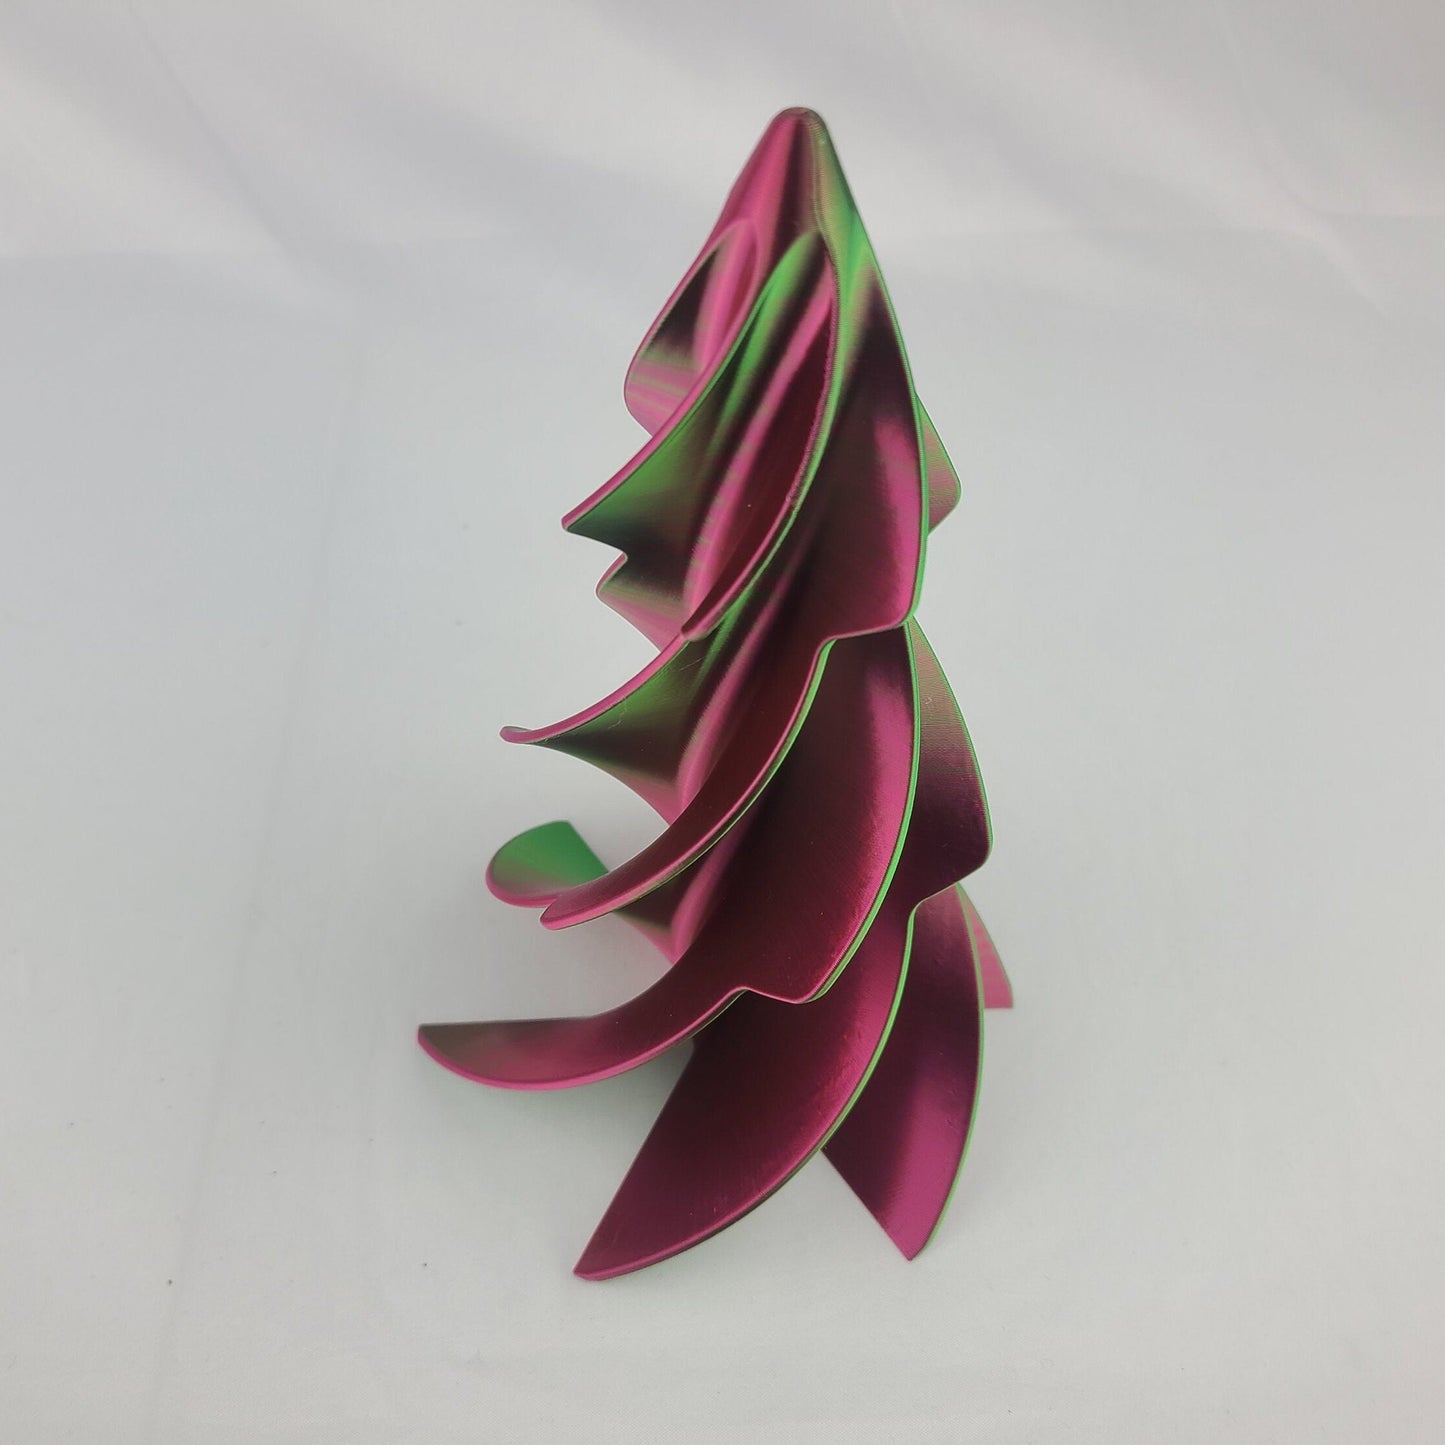 3D-Printed Christmas Tree Spiral Designs for Festive Decor